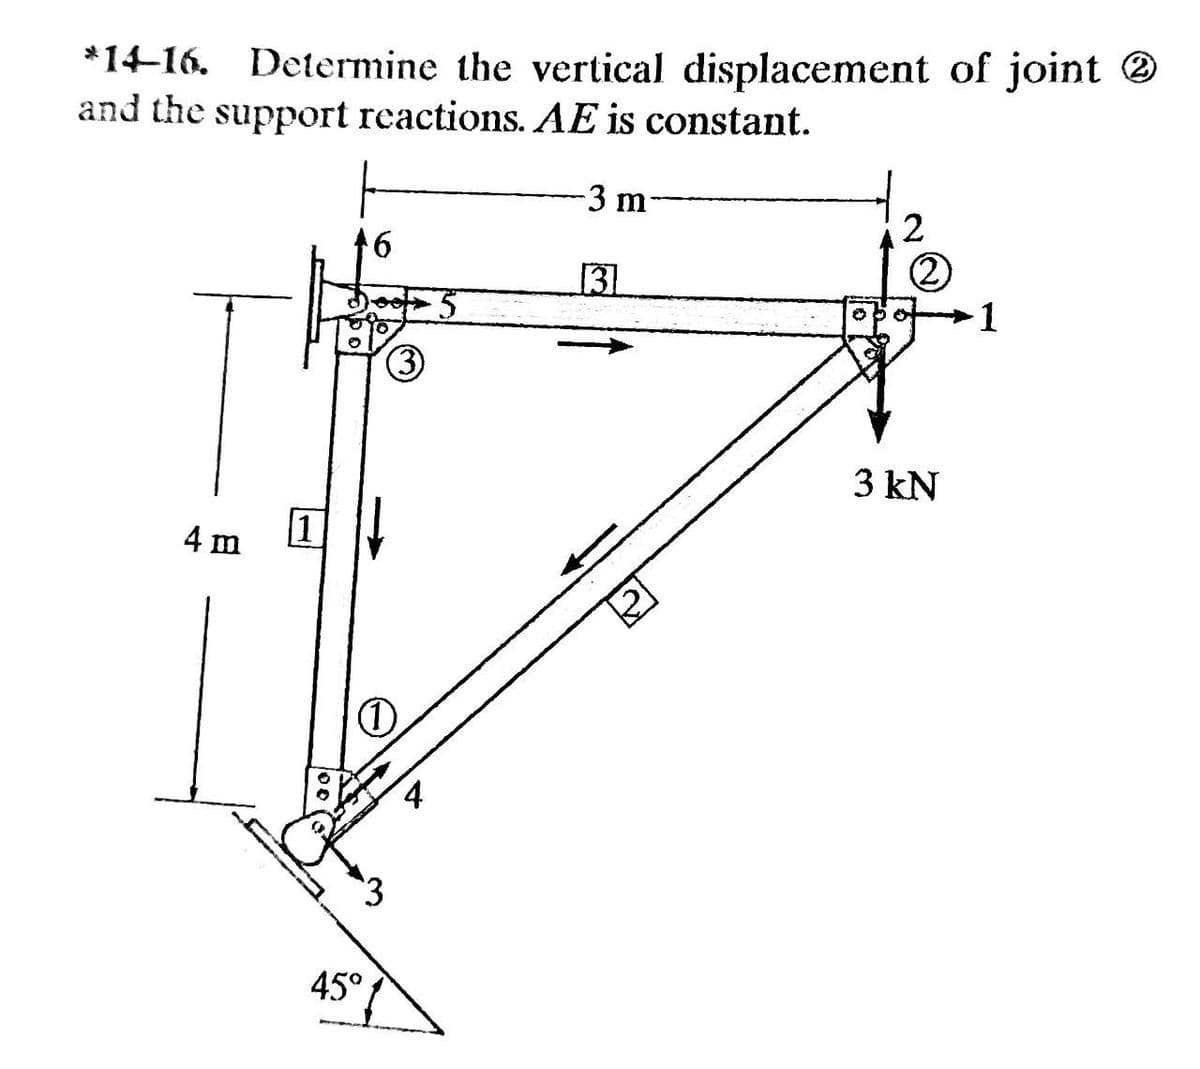 *14-16. Determine the vertical displacement of joint 2
and the support reactions. AE is constant.
-3 m
31
>1
3 kN
4 m
45°
